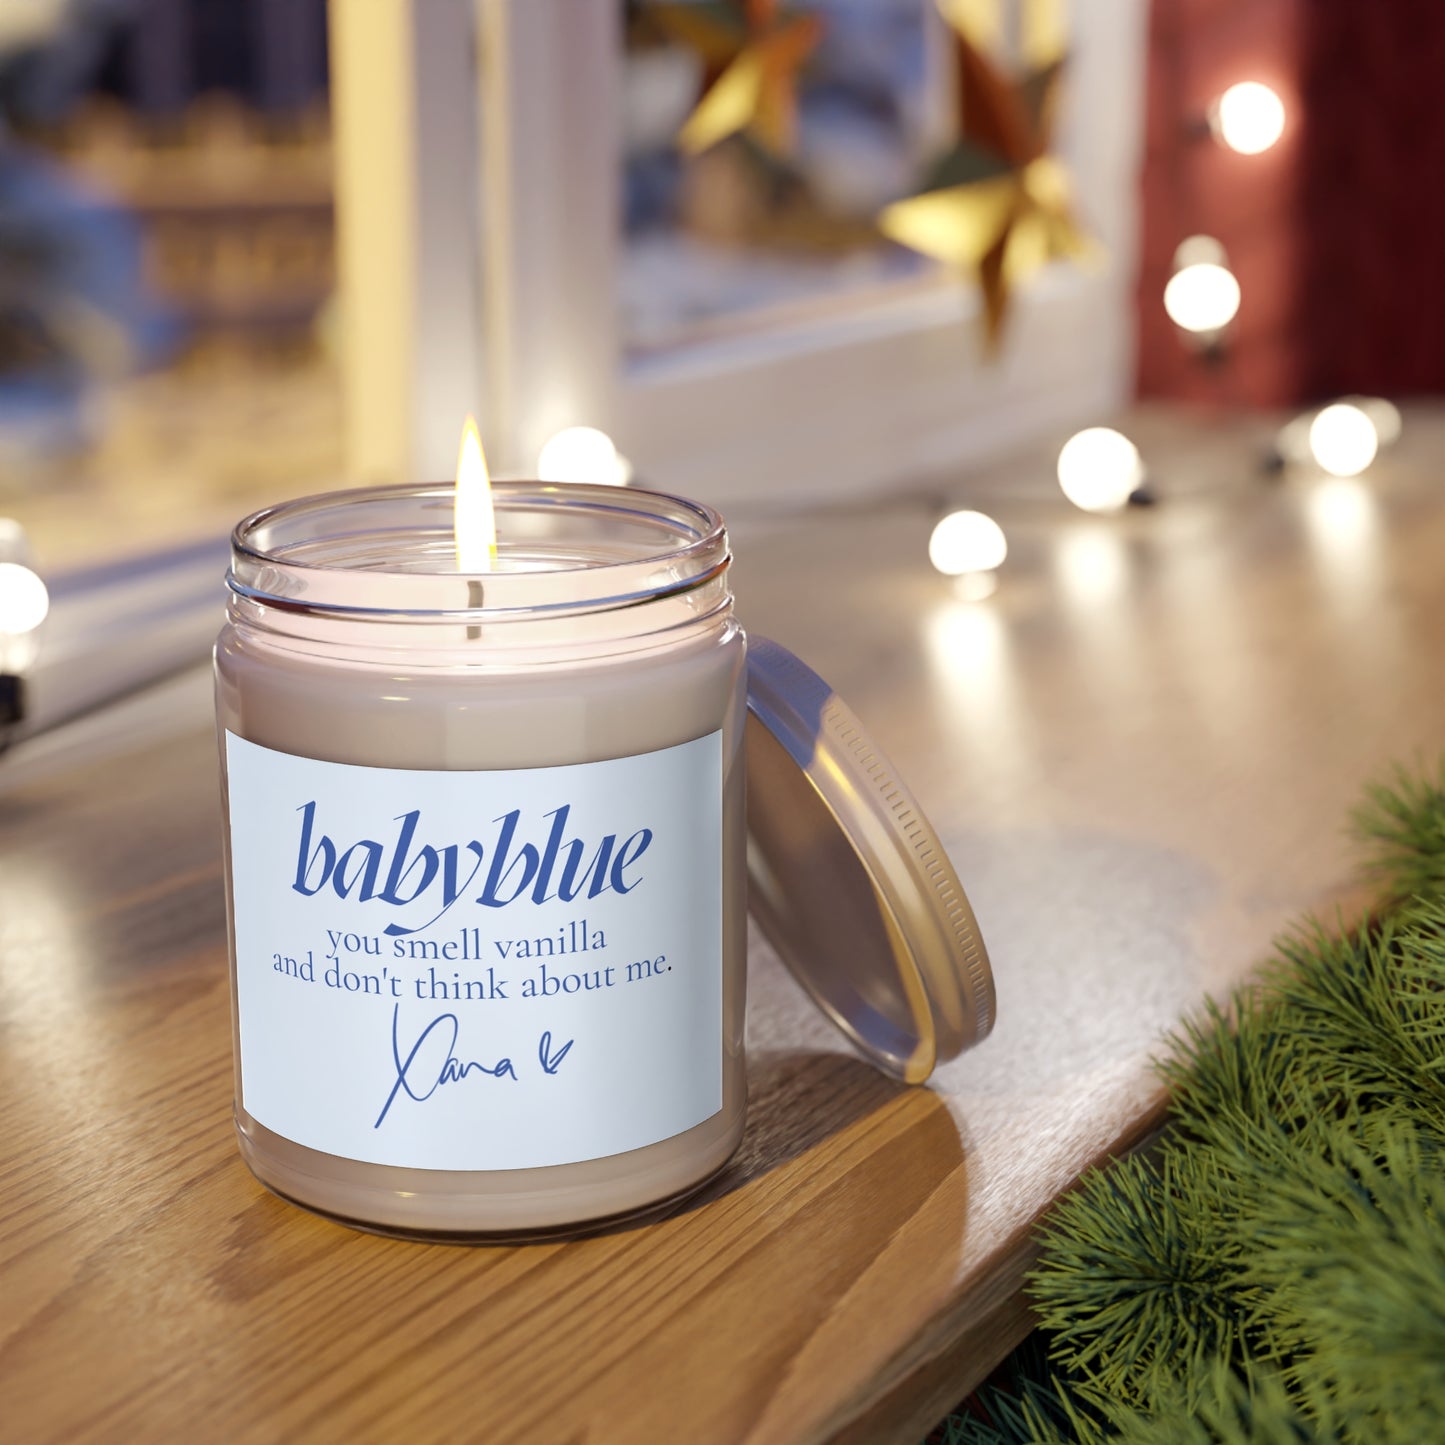 you smell vanilla and don't think about me - babyblue Candle